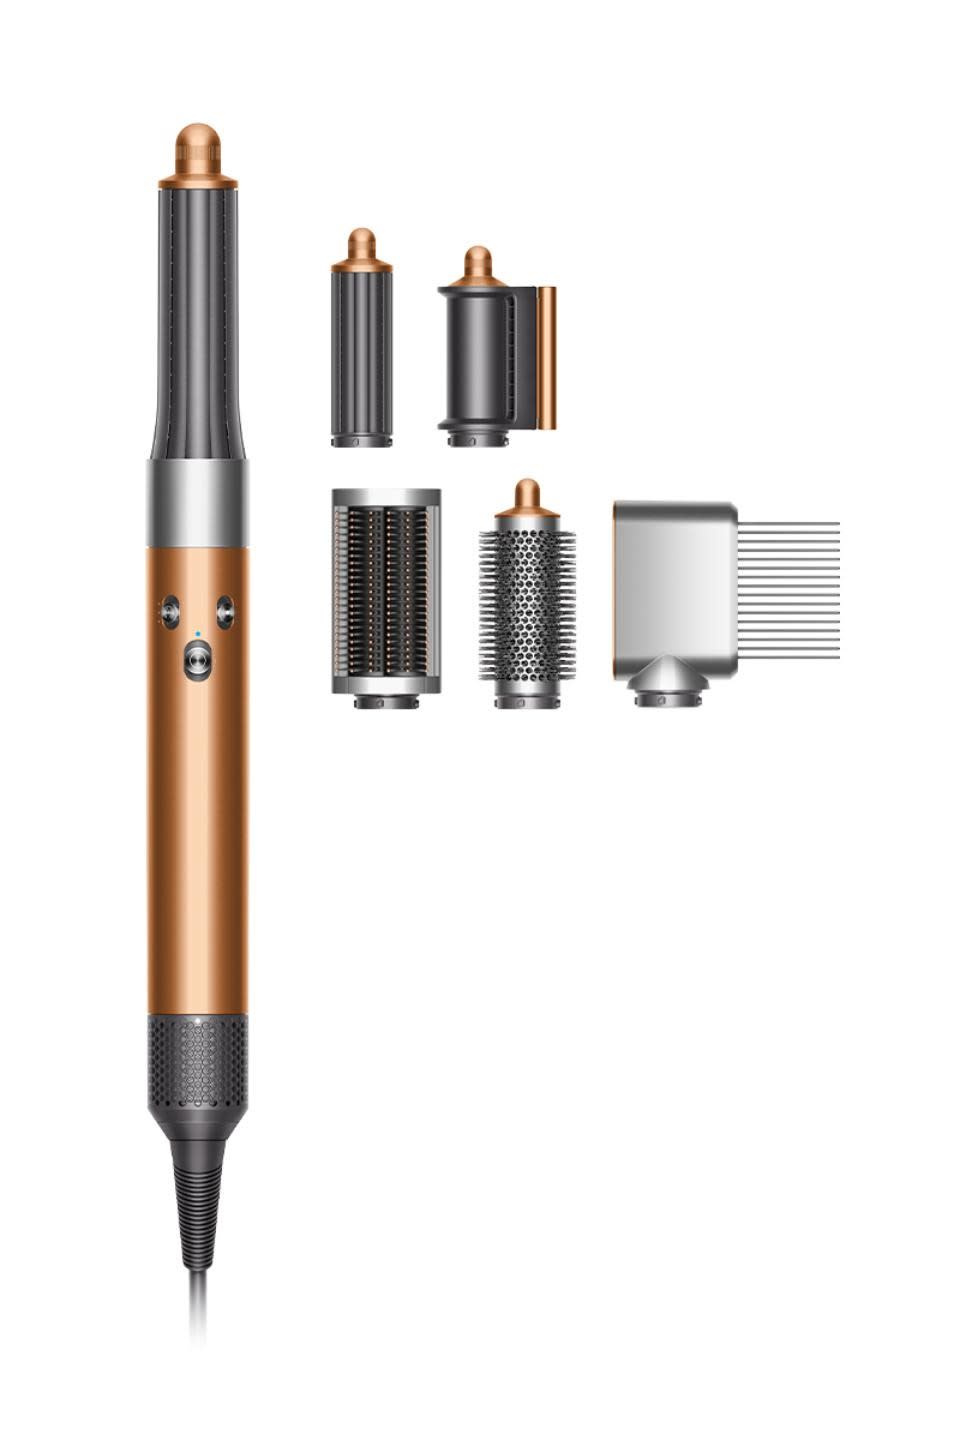 Dyson Airwrap Multi-Styler Complete Curly/Coily Copper/Nickel